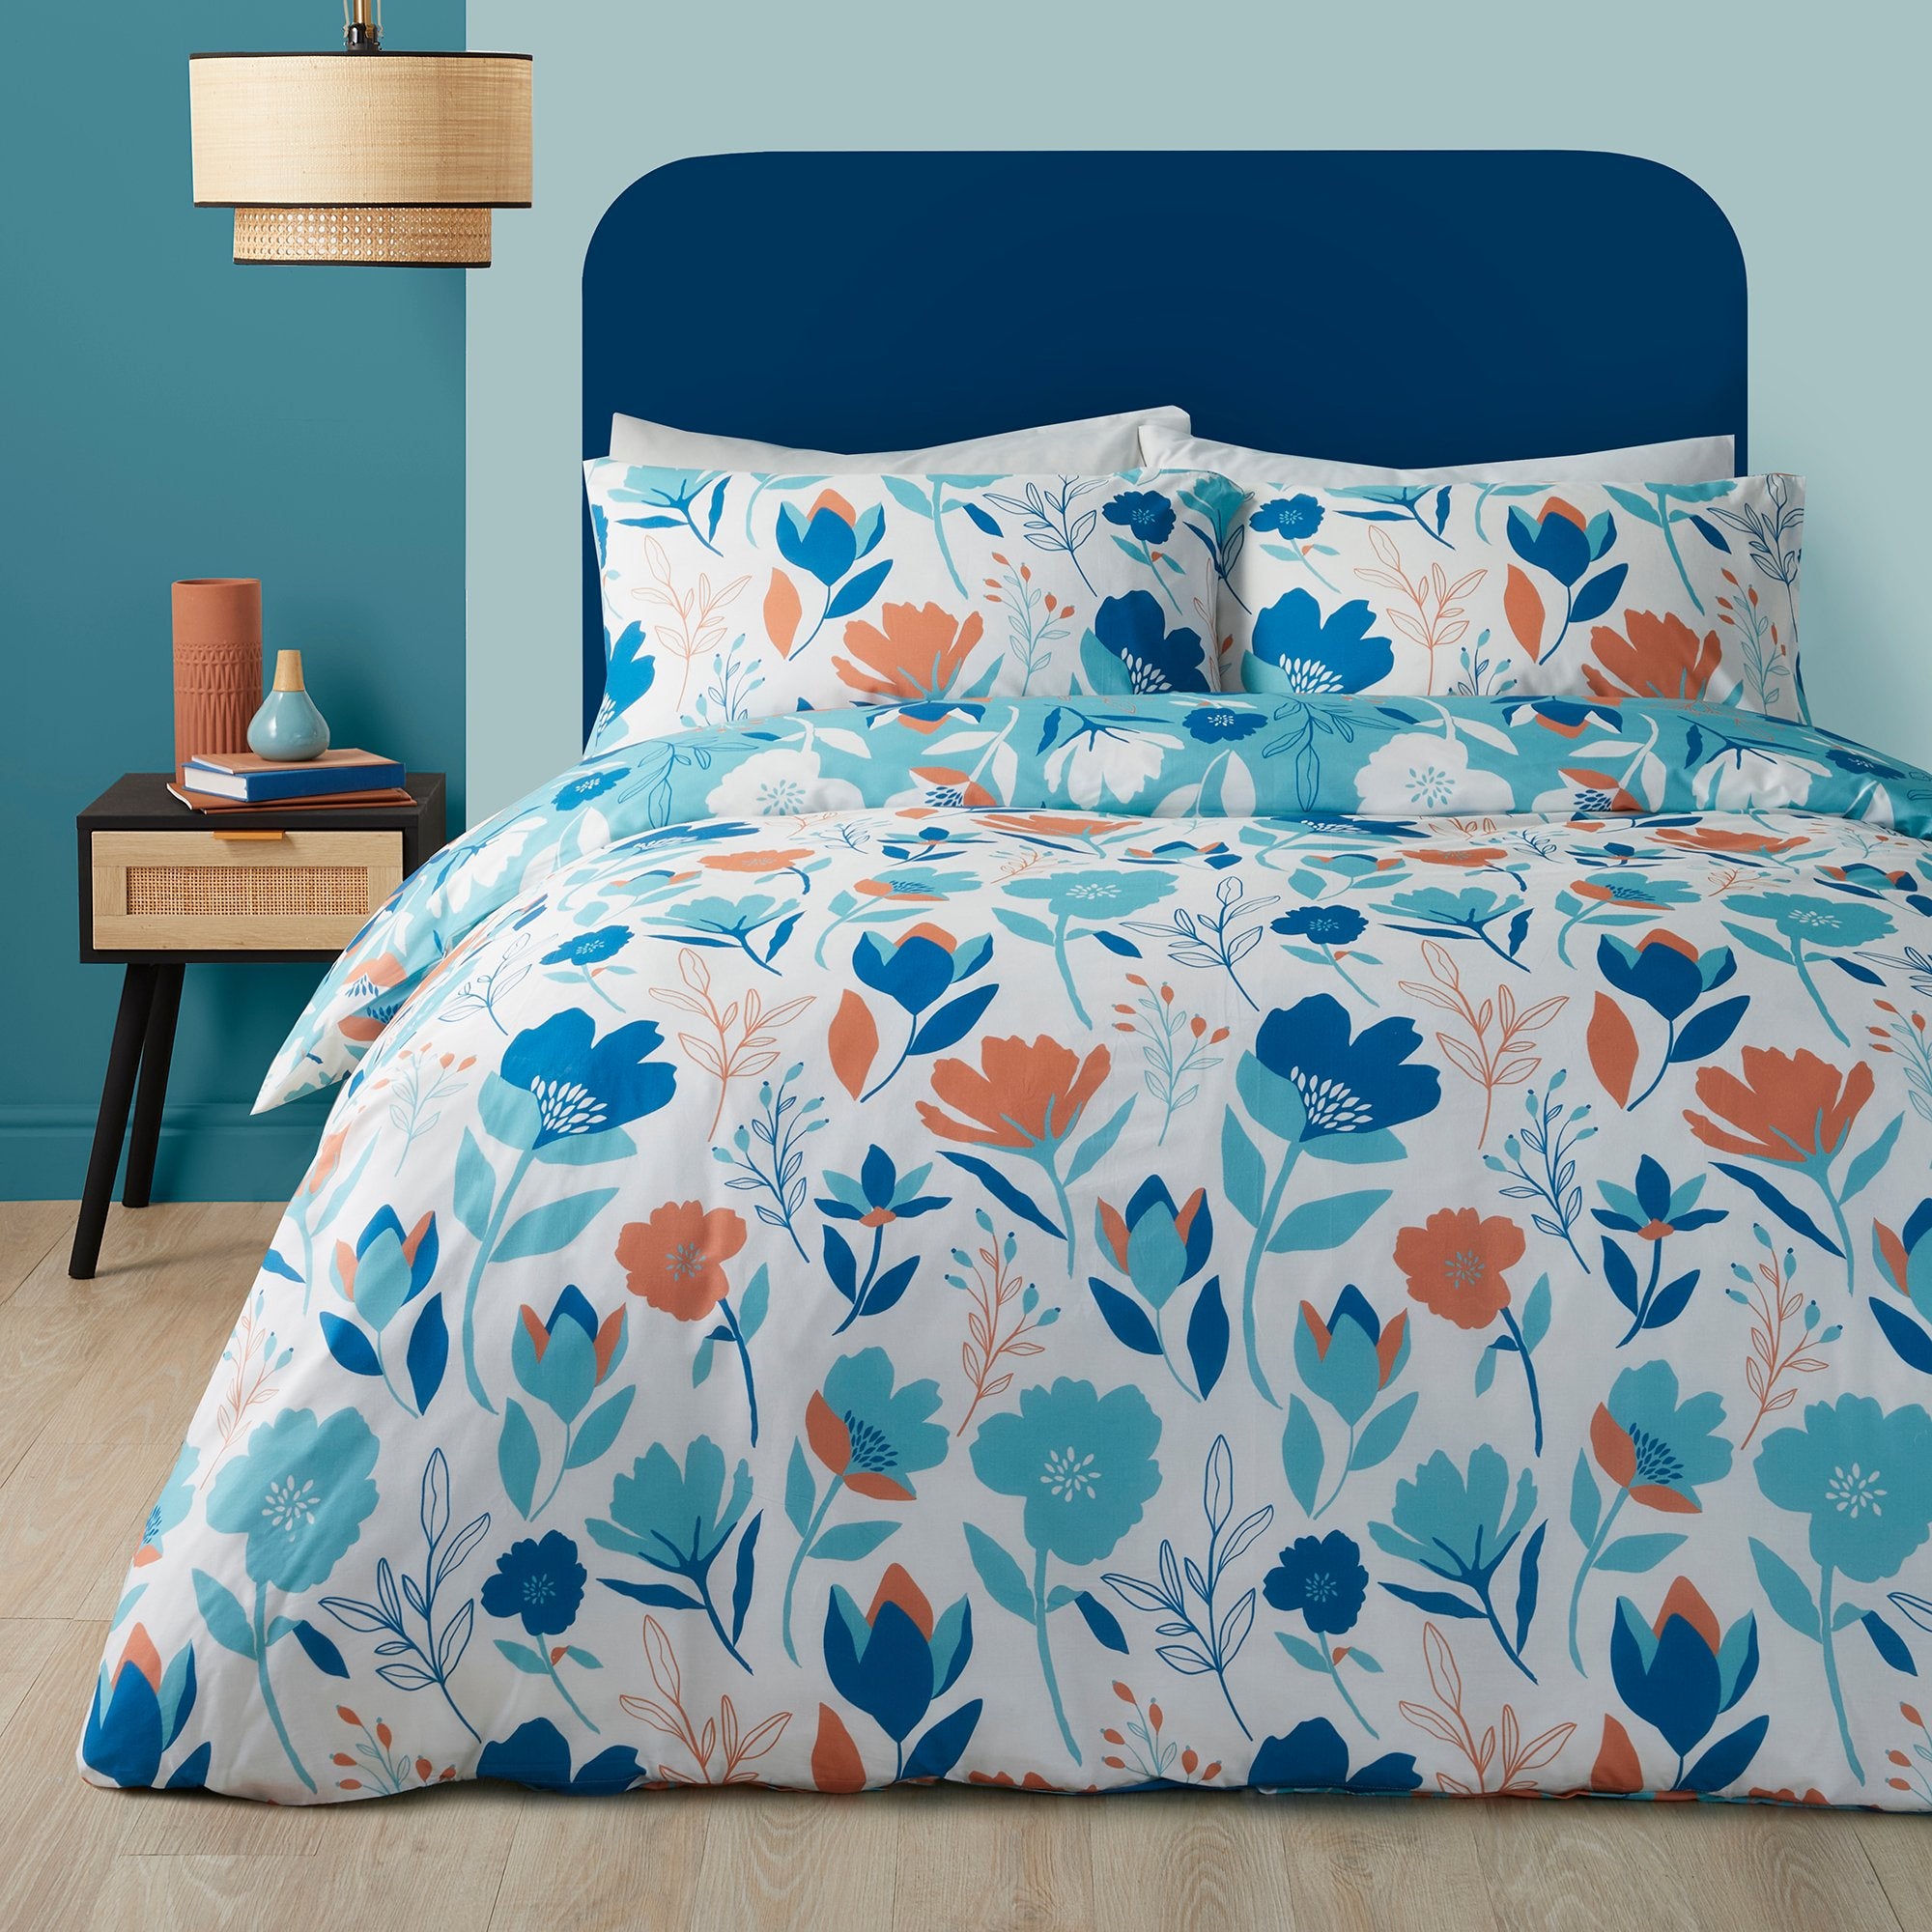 Duvet Cover Set Luna by Fusion in Duck Egg